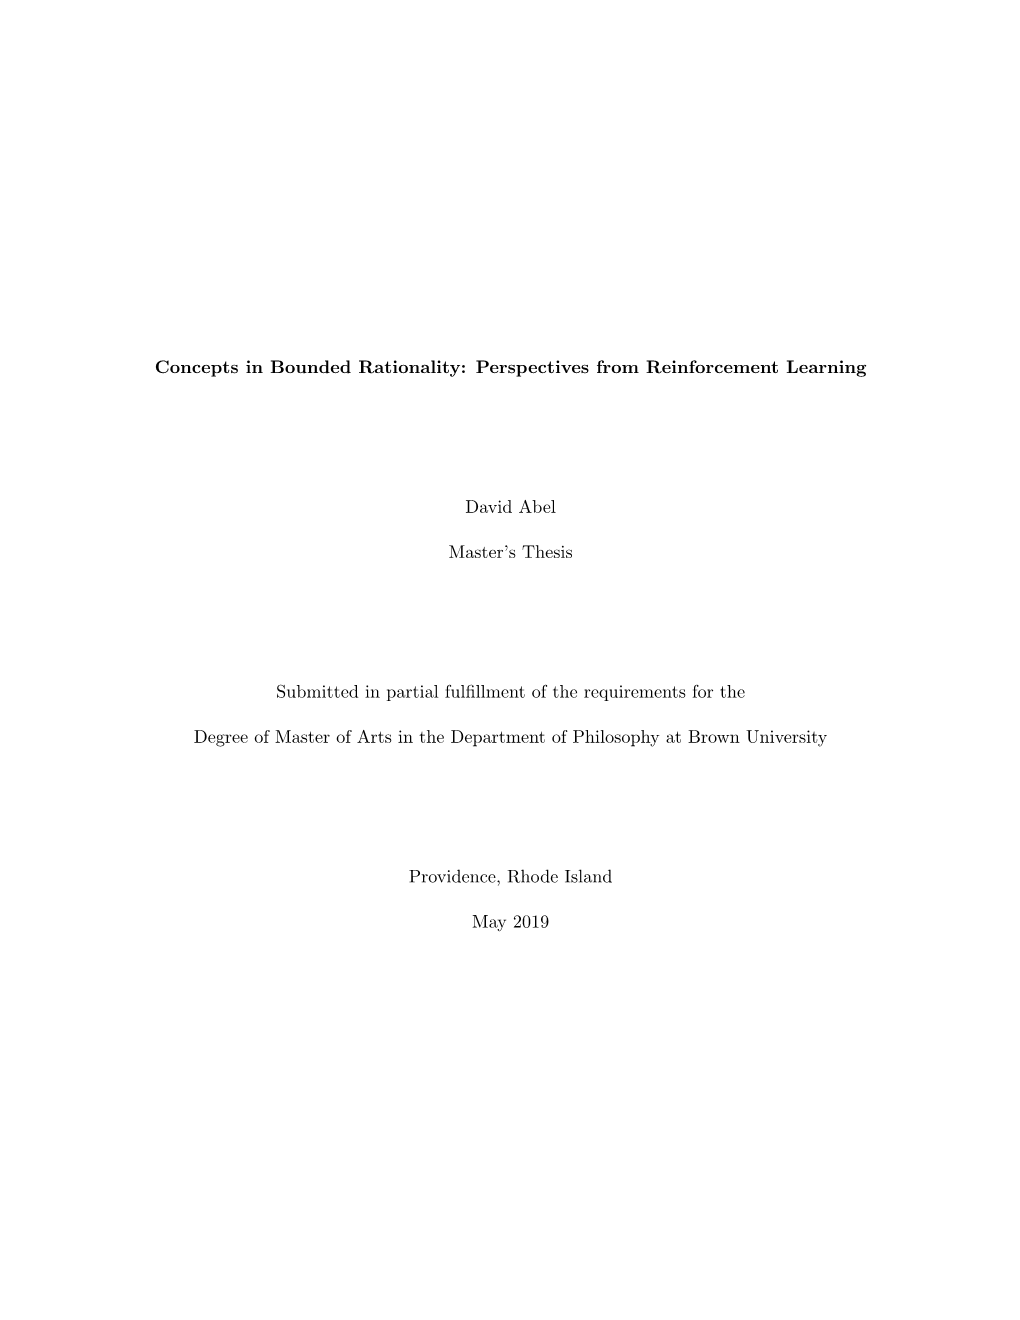 Concepts in Bounded Rationality: Perspectives from Reinforcement Learning